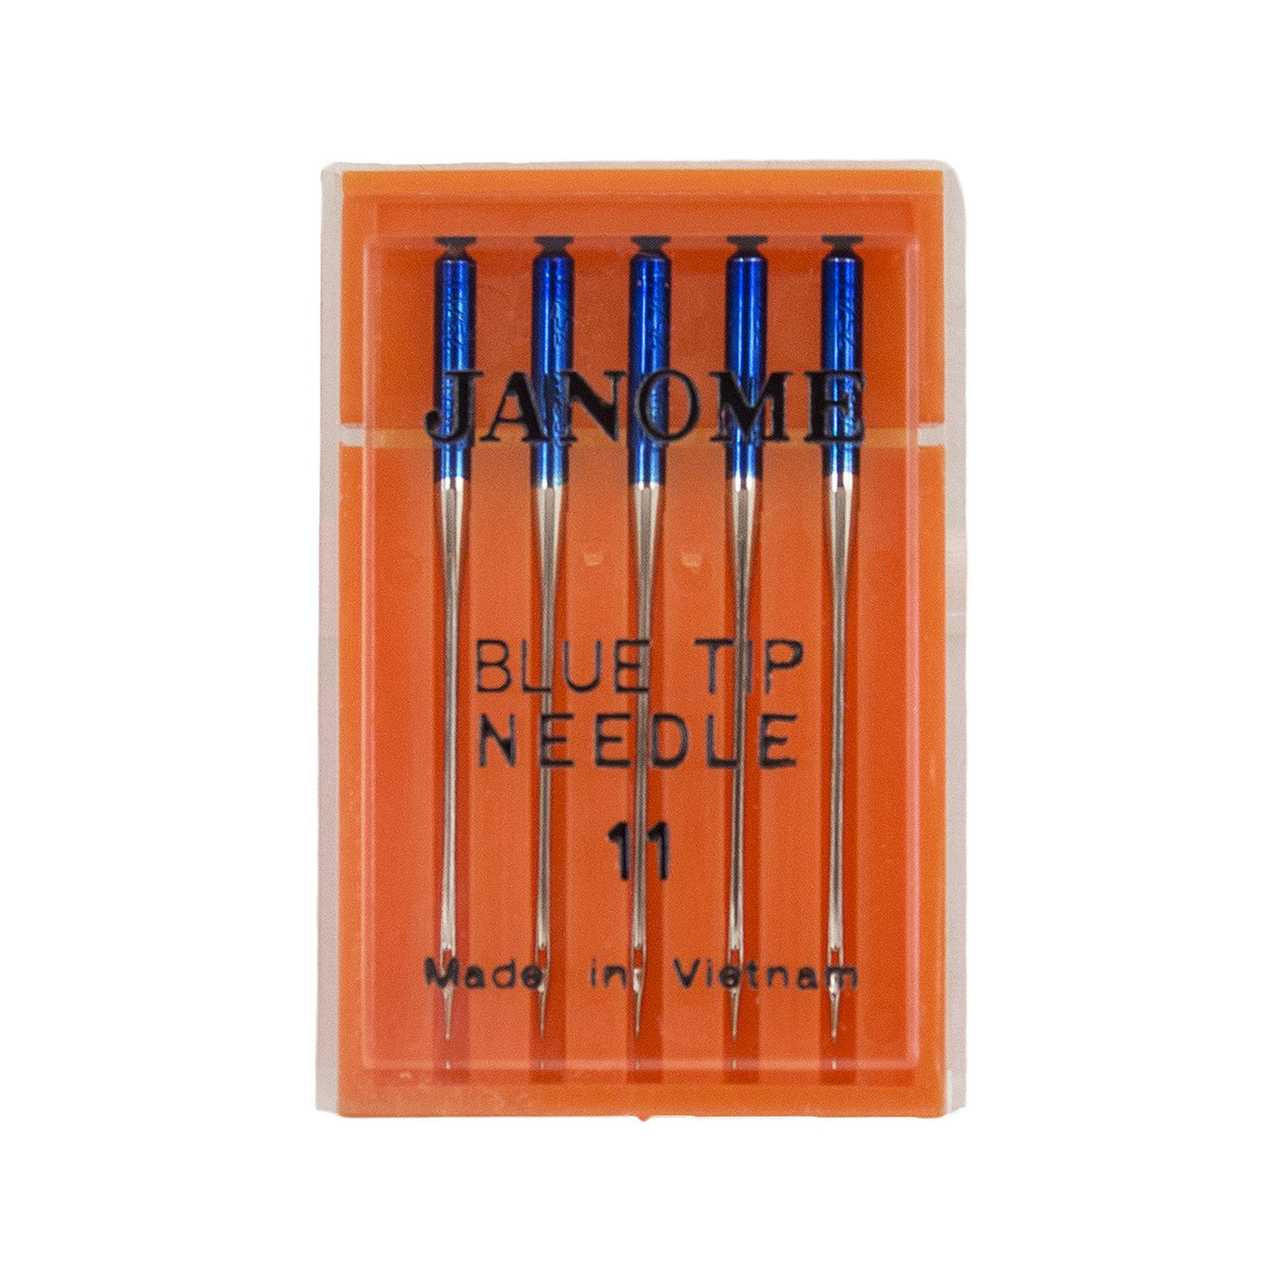 Janome Purple Tip Embroidery Needles - 5 pack